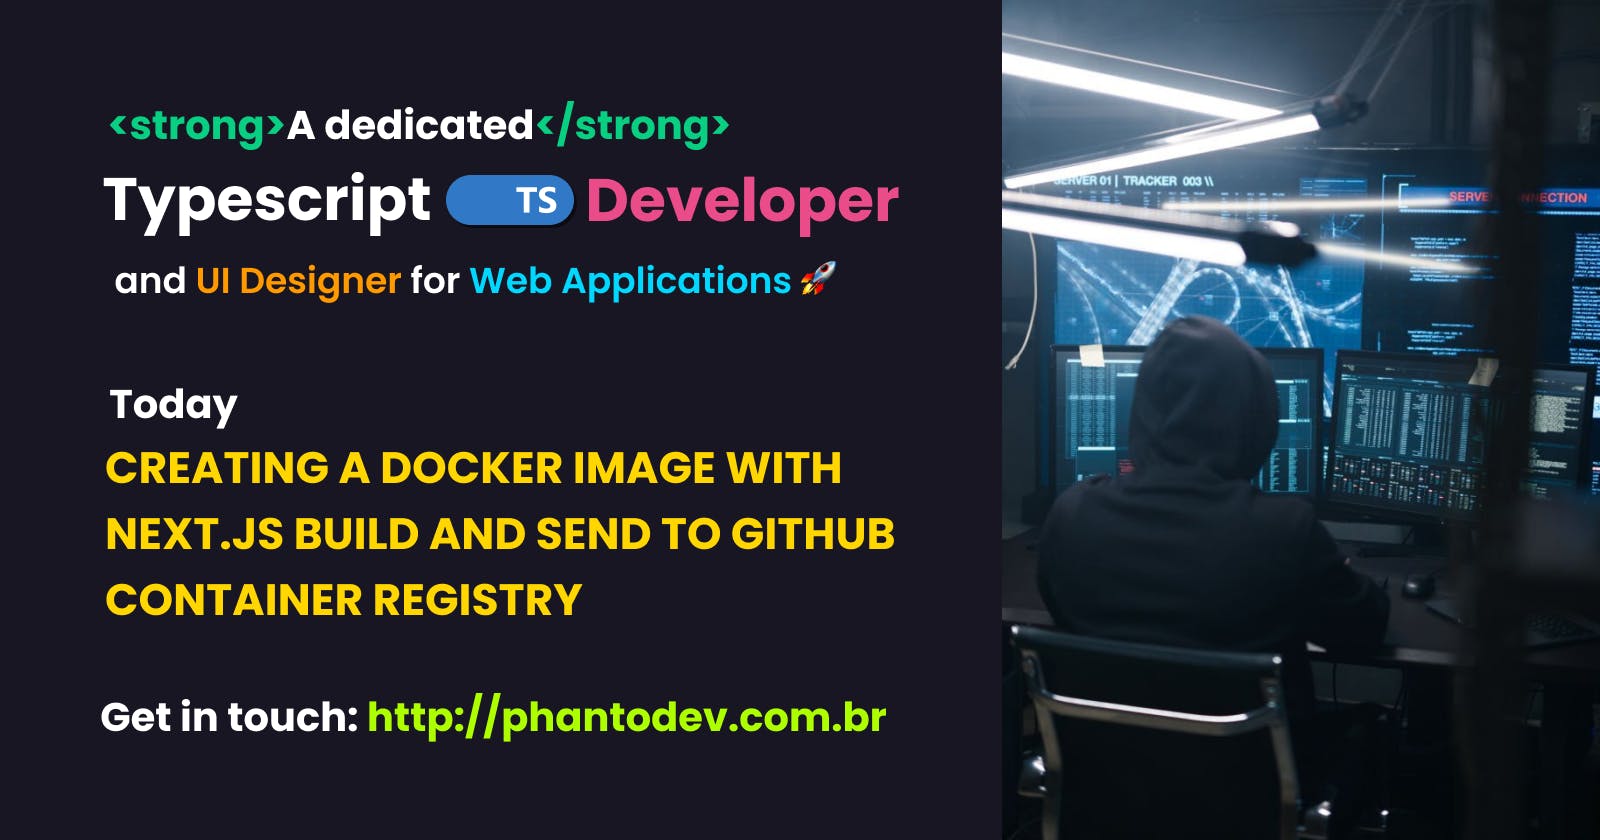 Creating a Docker Image with Next.js Build and send to GitHub Container Registry